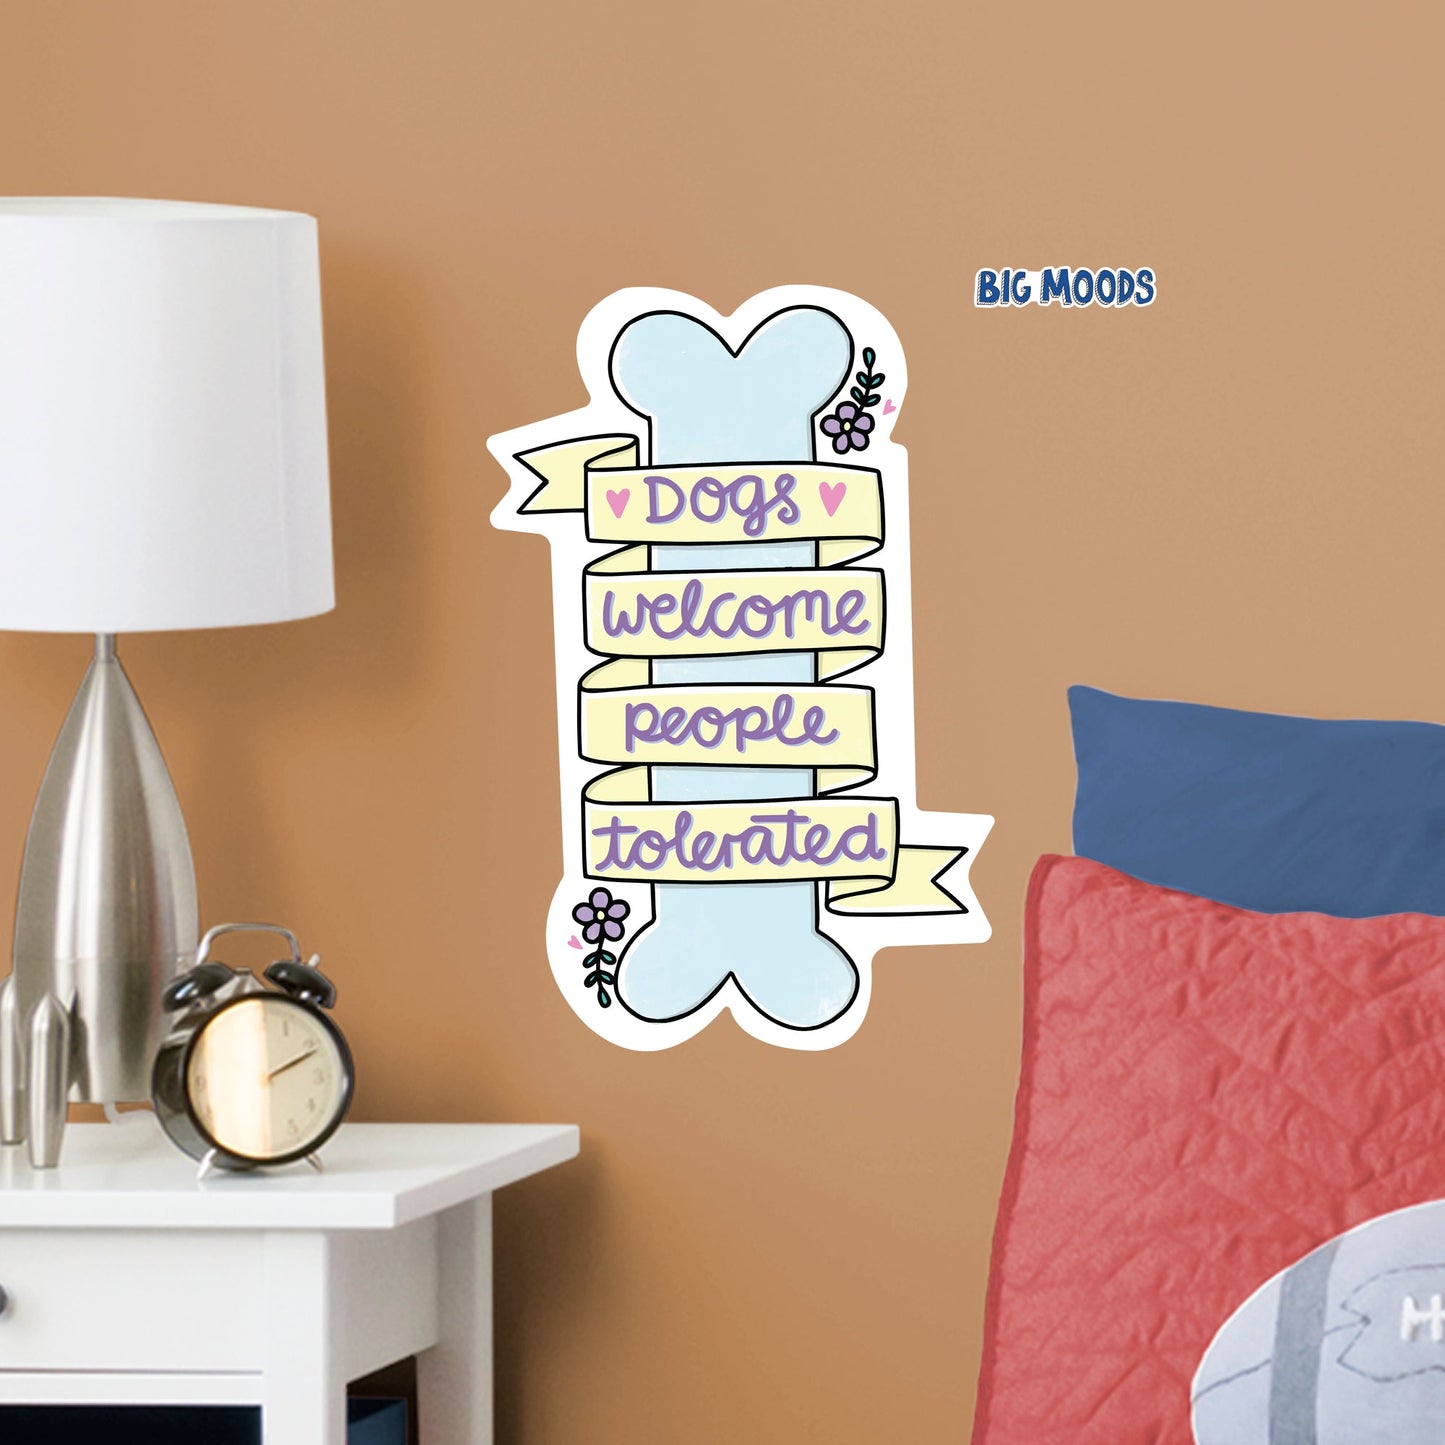 Dogs Welcome        - Officially Licensed Big Moods Removable     Adhesive Decal